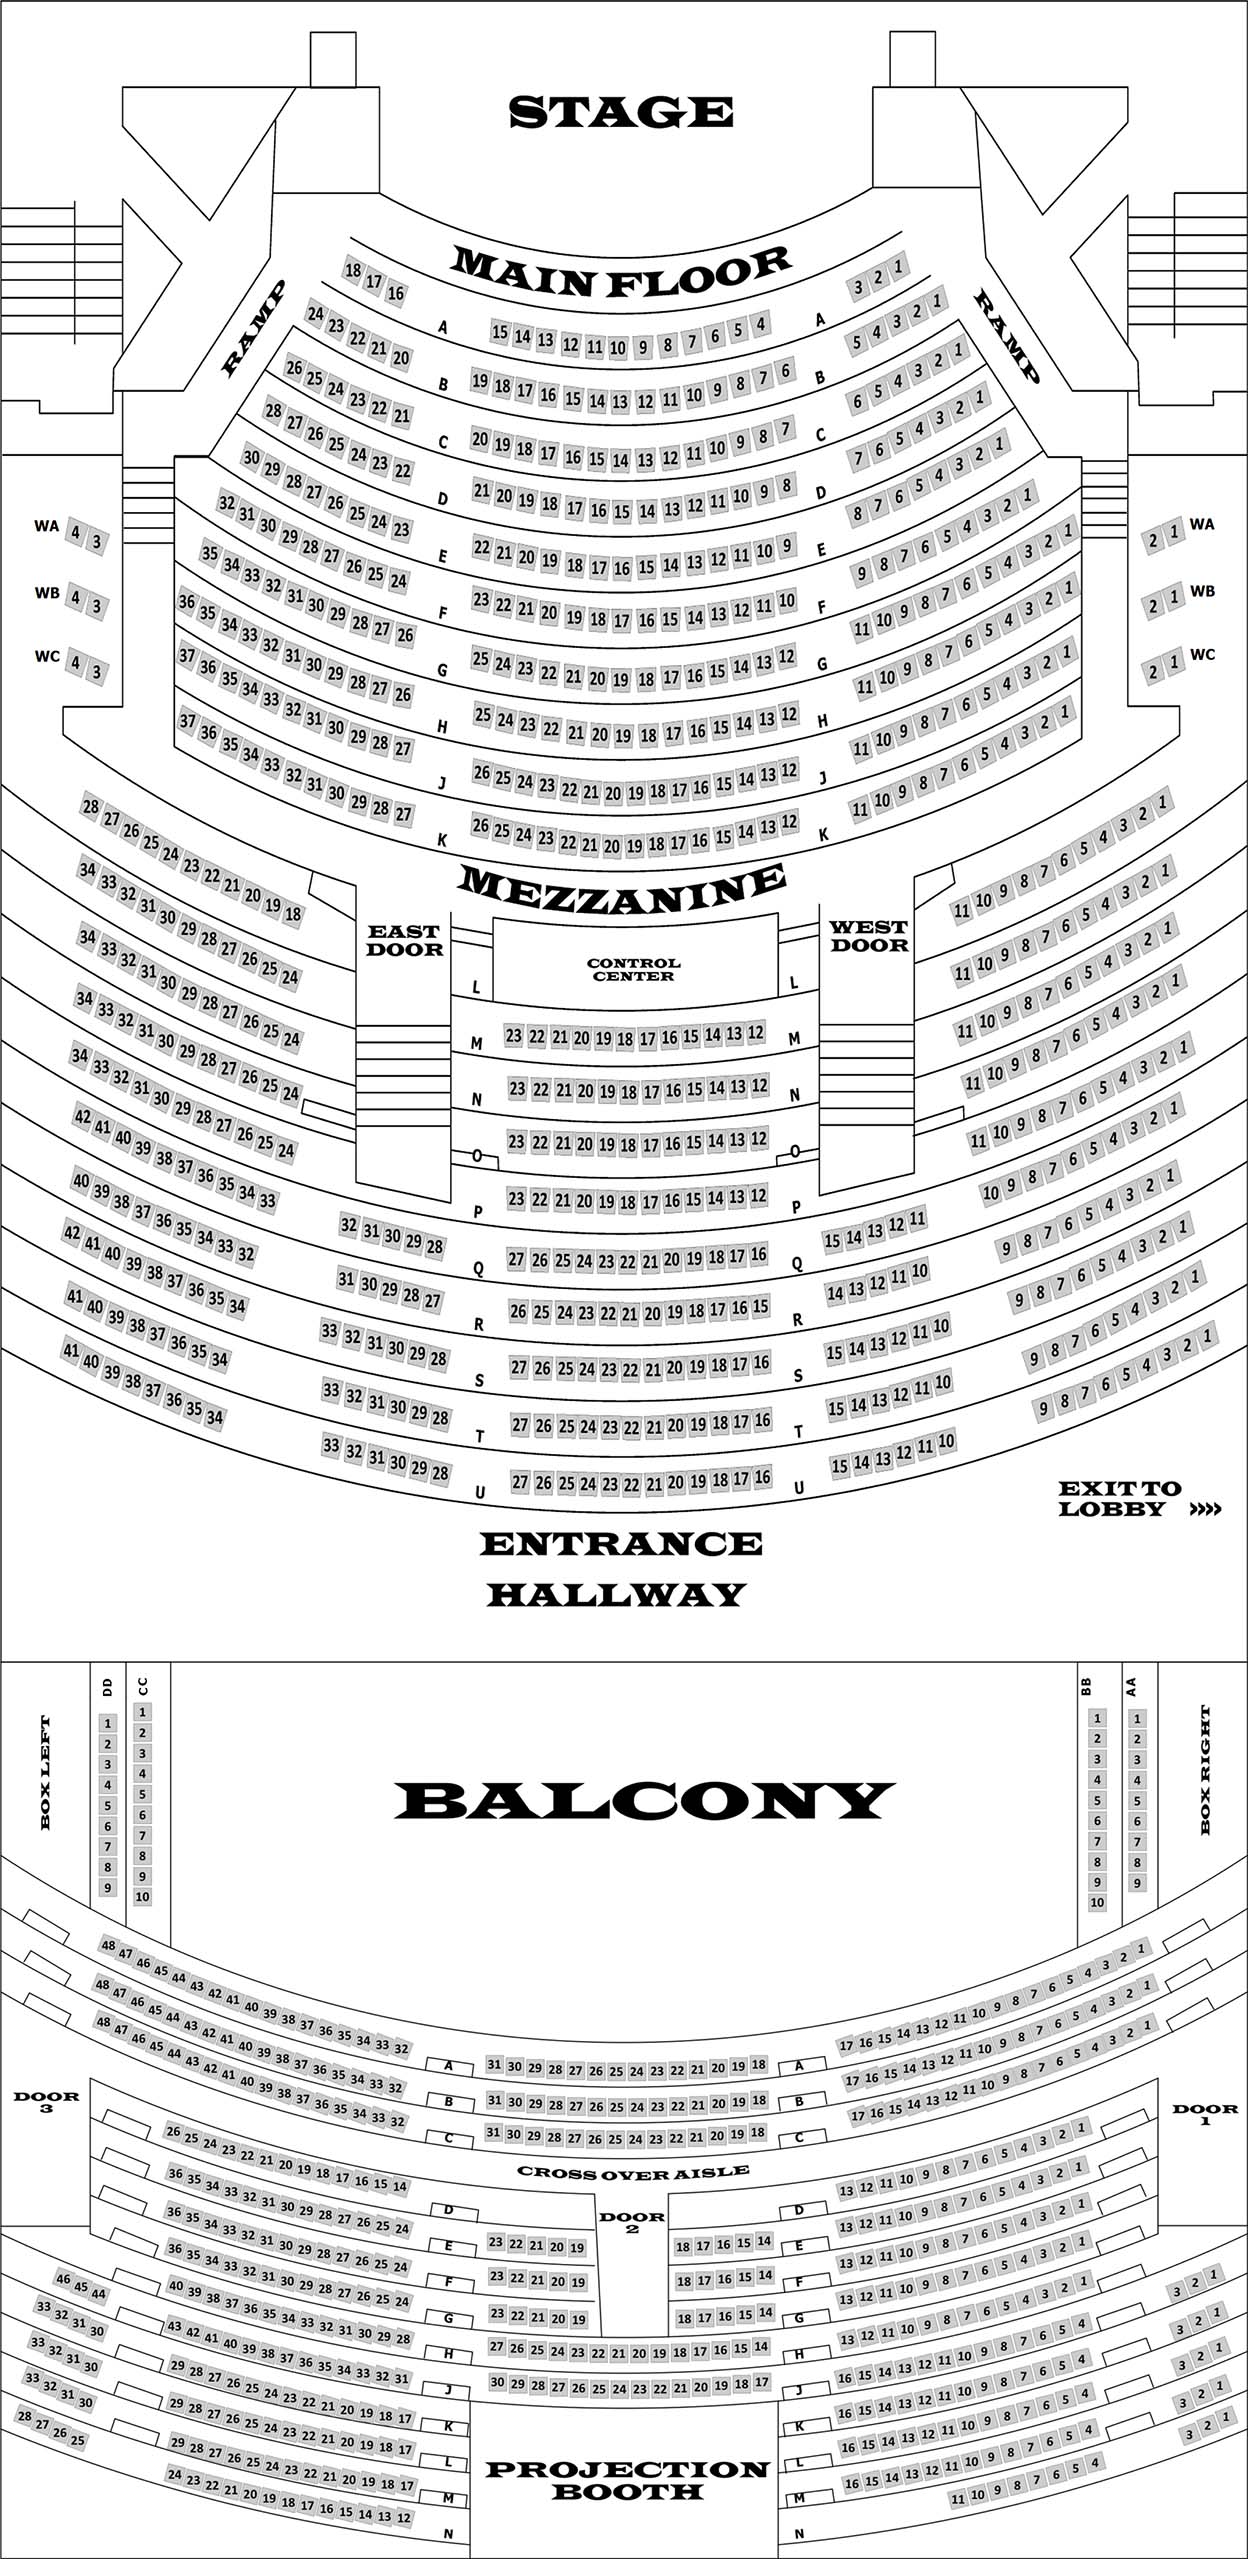 2022 Motherlode Theatre Seating Chart